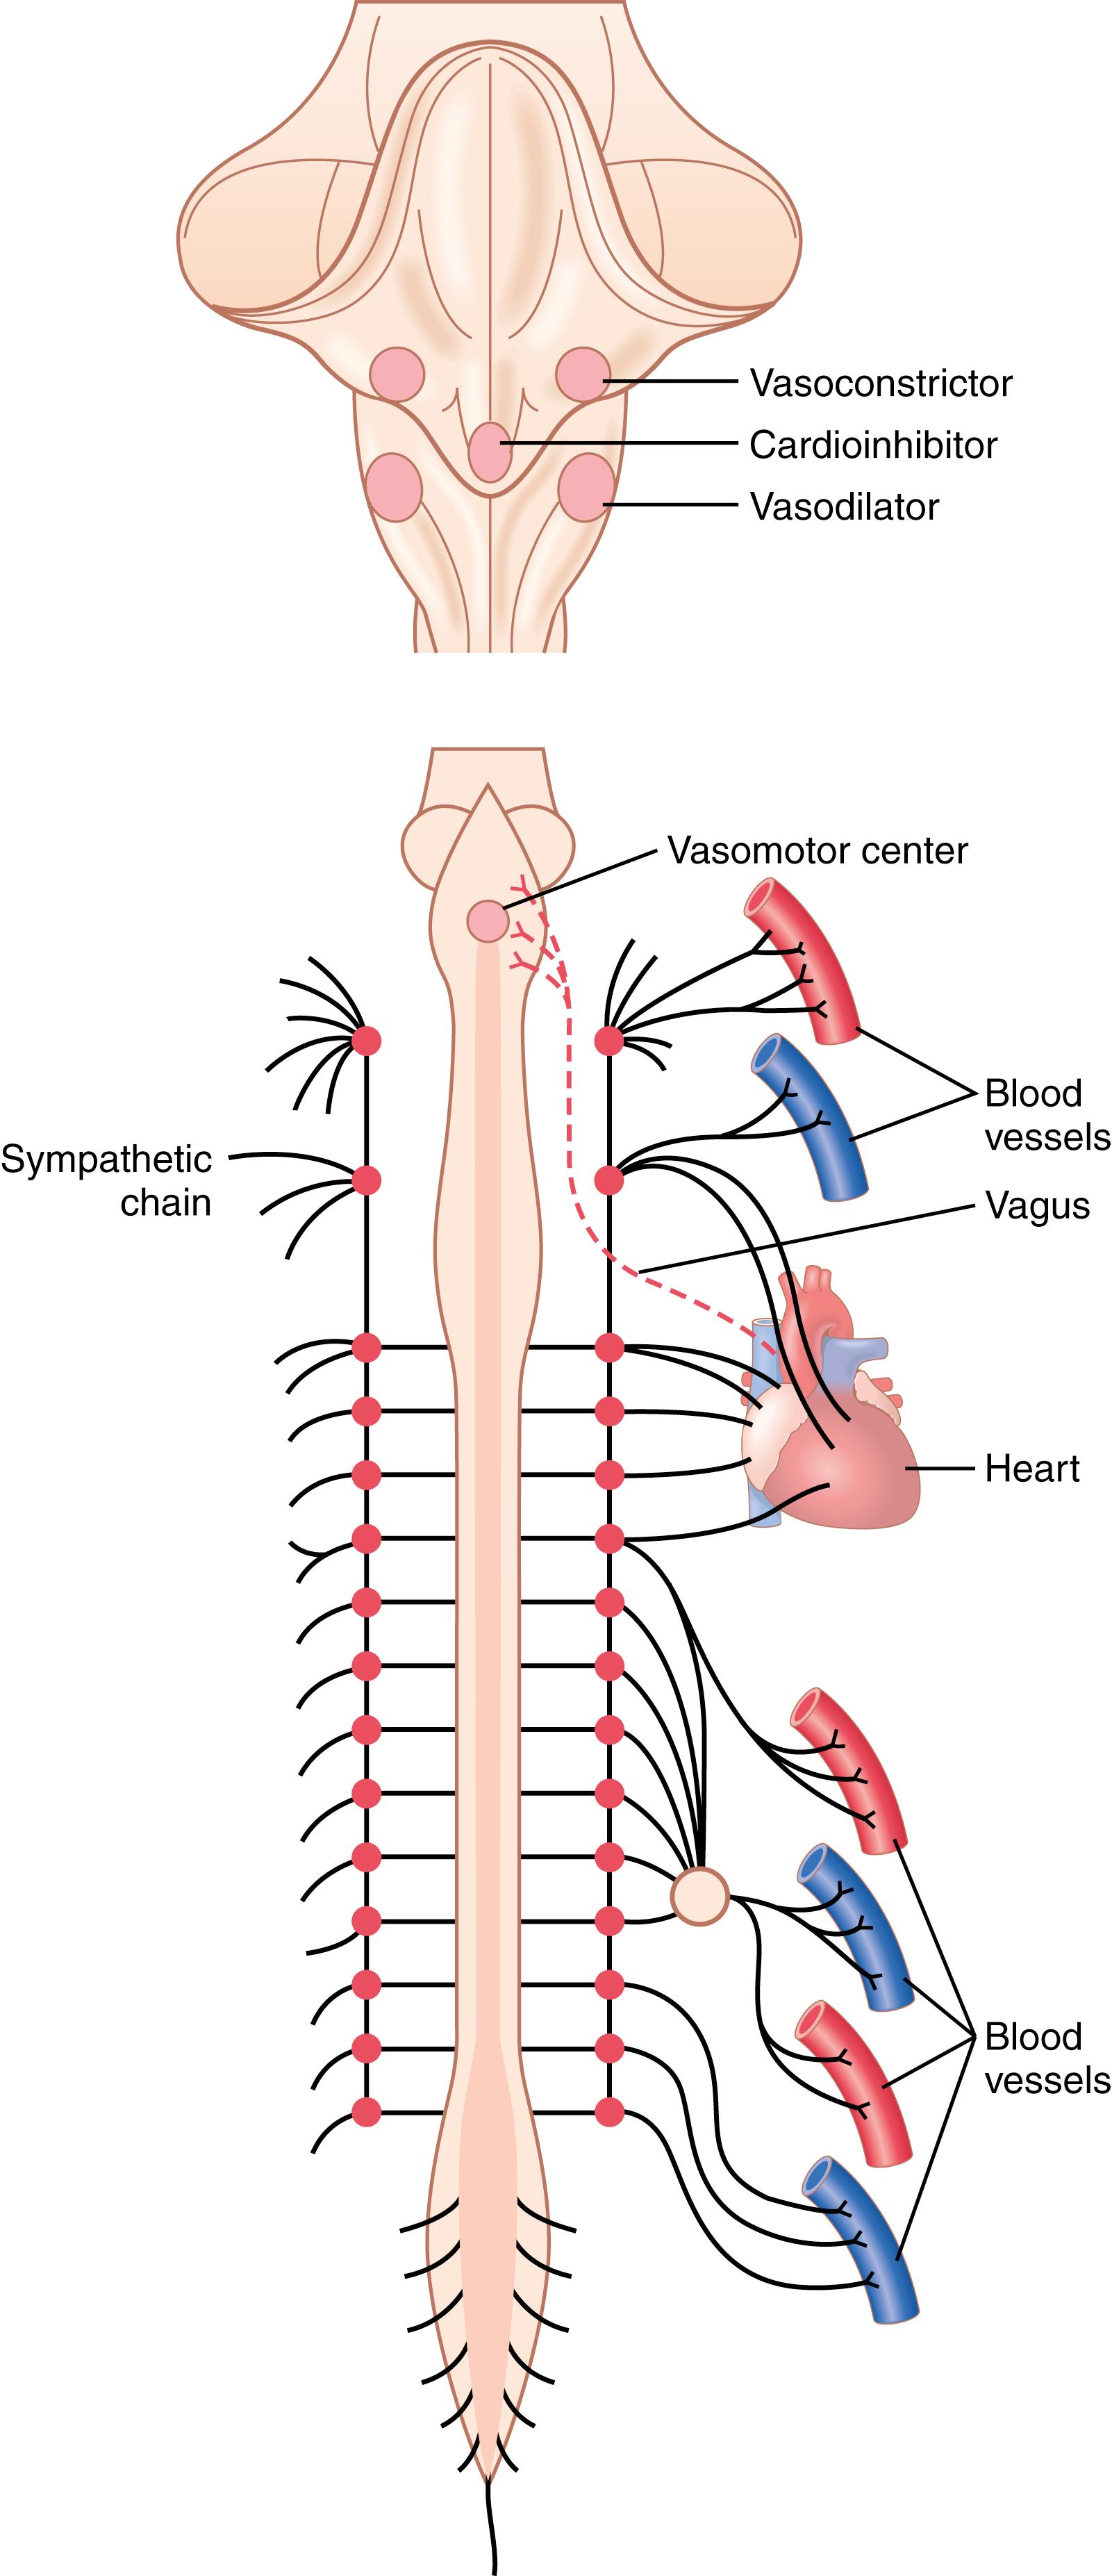 Figure 18-1., Anatomy of sympathetic nervous control of the circulation. Also, shown by the dashed red line, is a vagus nerve that carries parasympathetic signals to the heart.